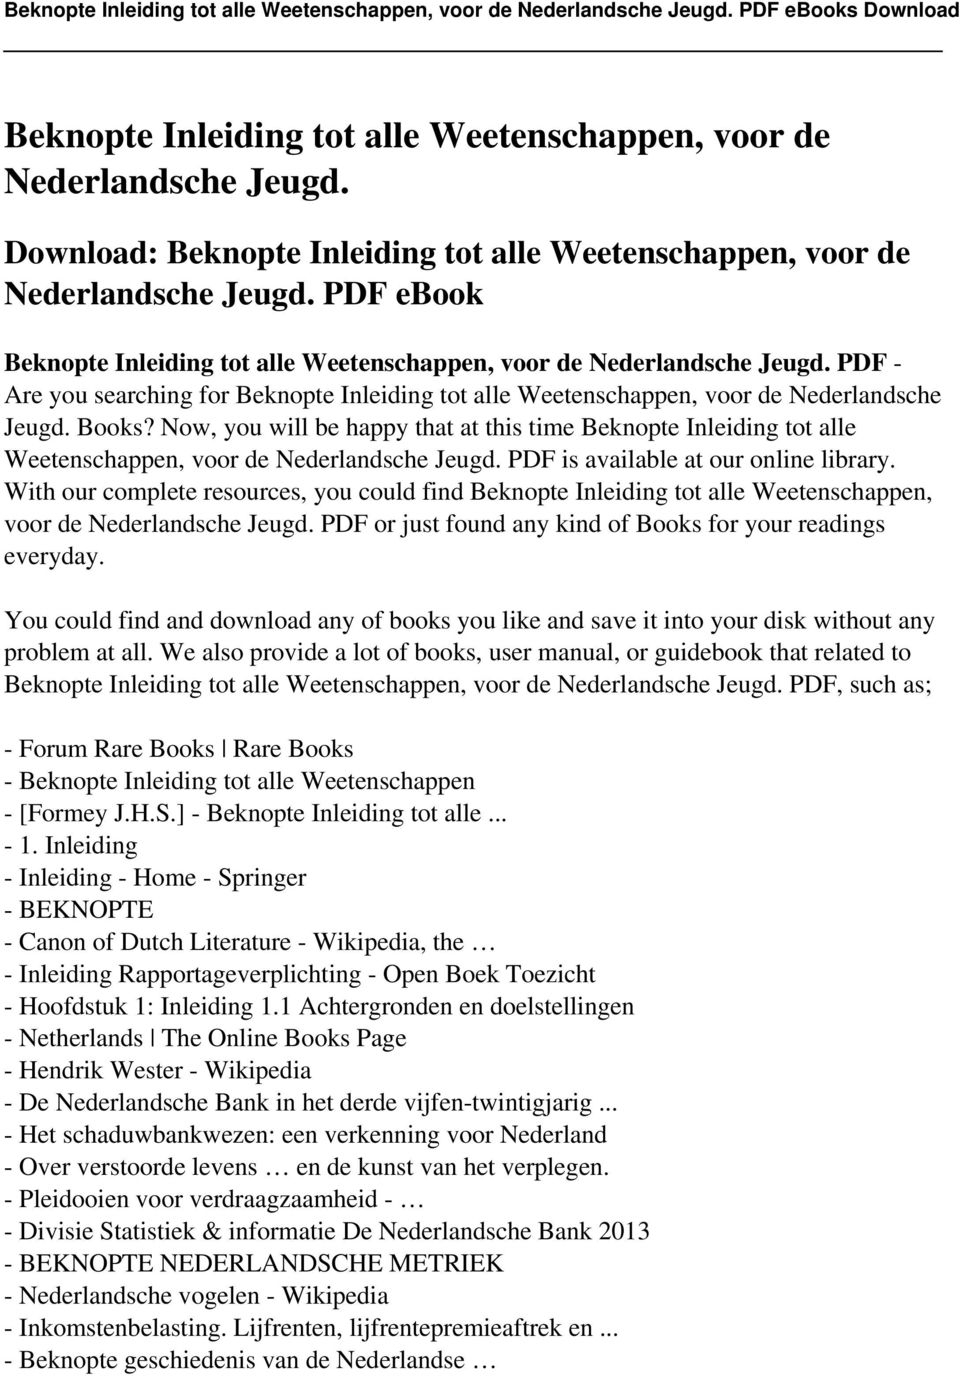 Now, you will be happy that at this time Beknopte Inleiding tot alle Weetenschappen, voor de Nederlandsche Jeugd. PDF is available at our online library.